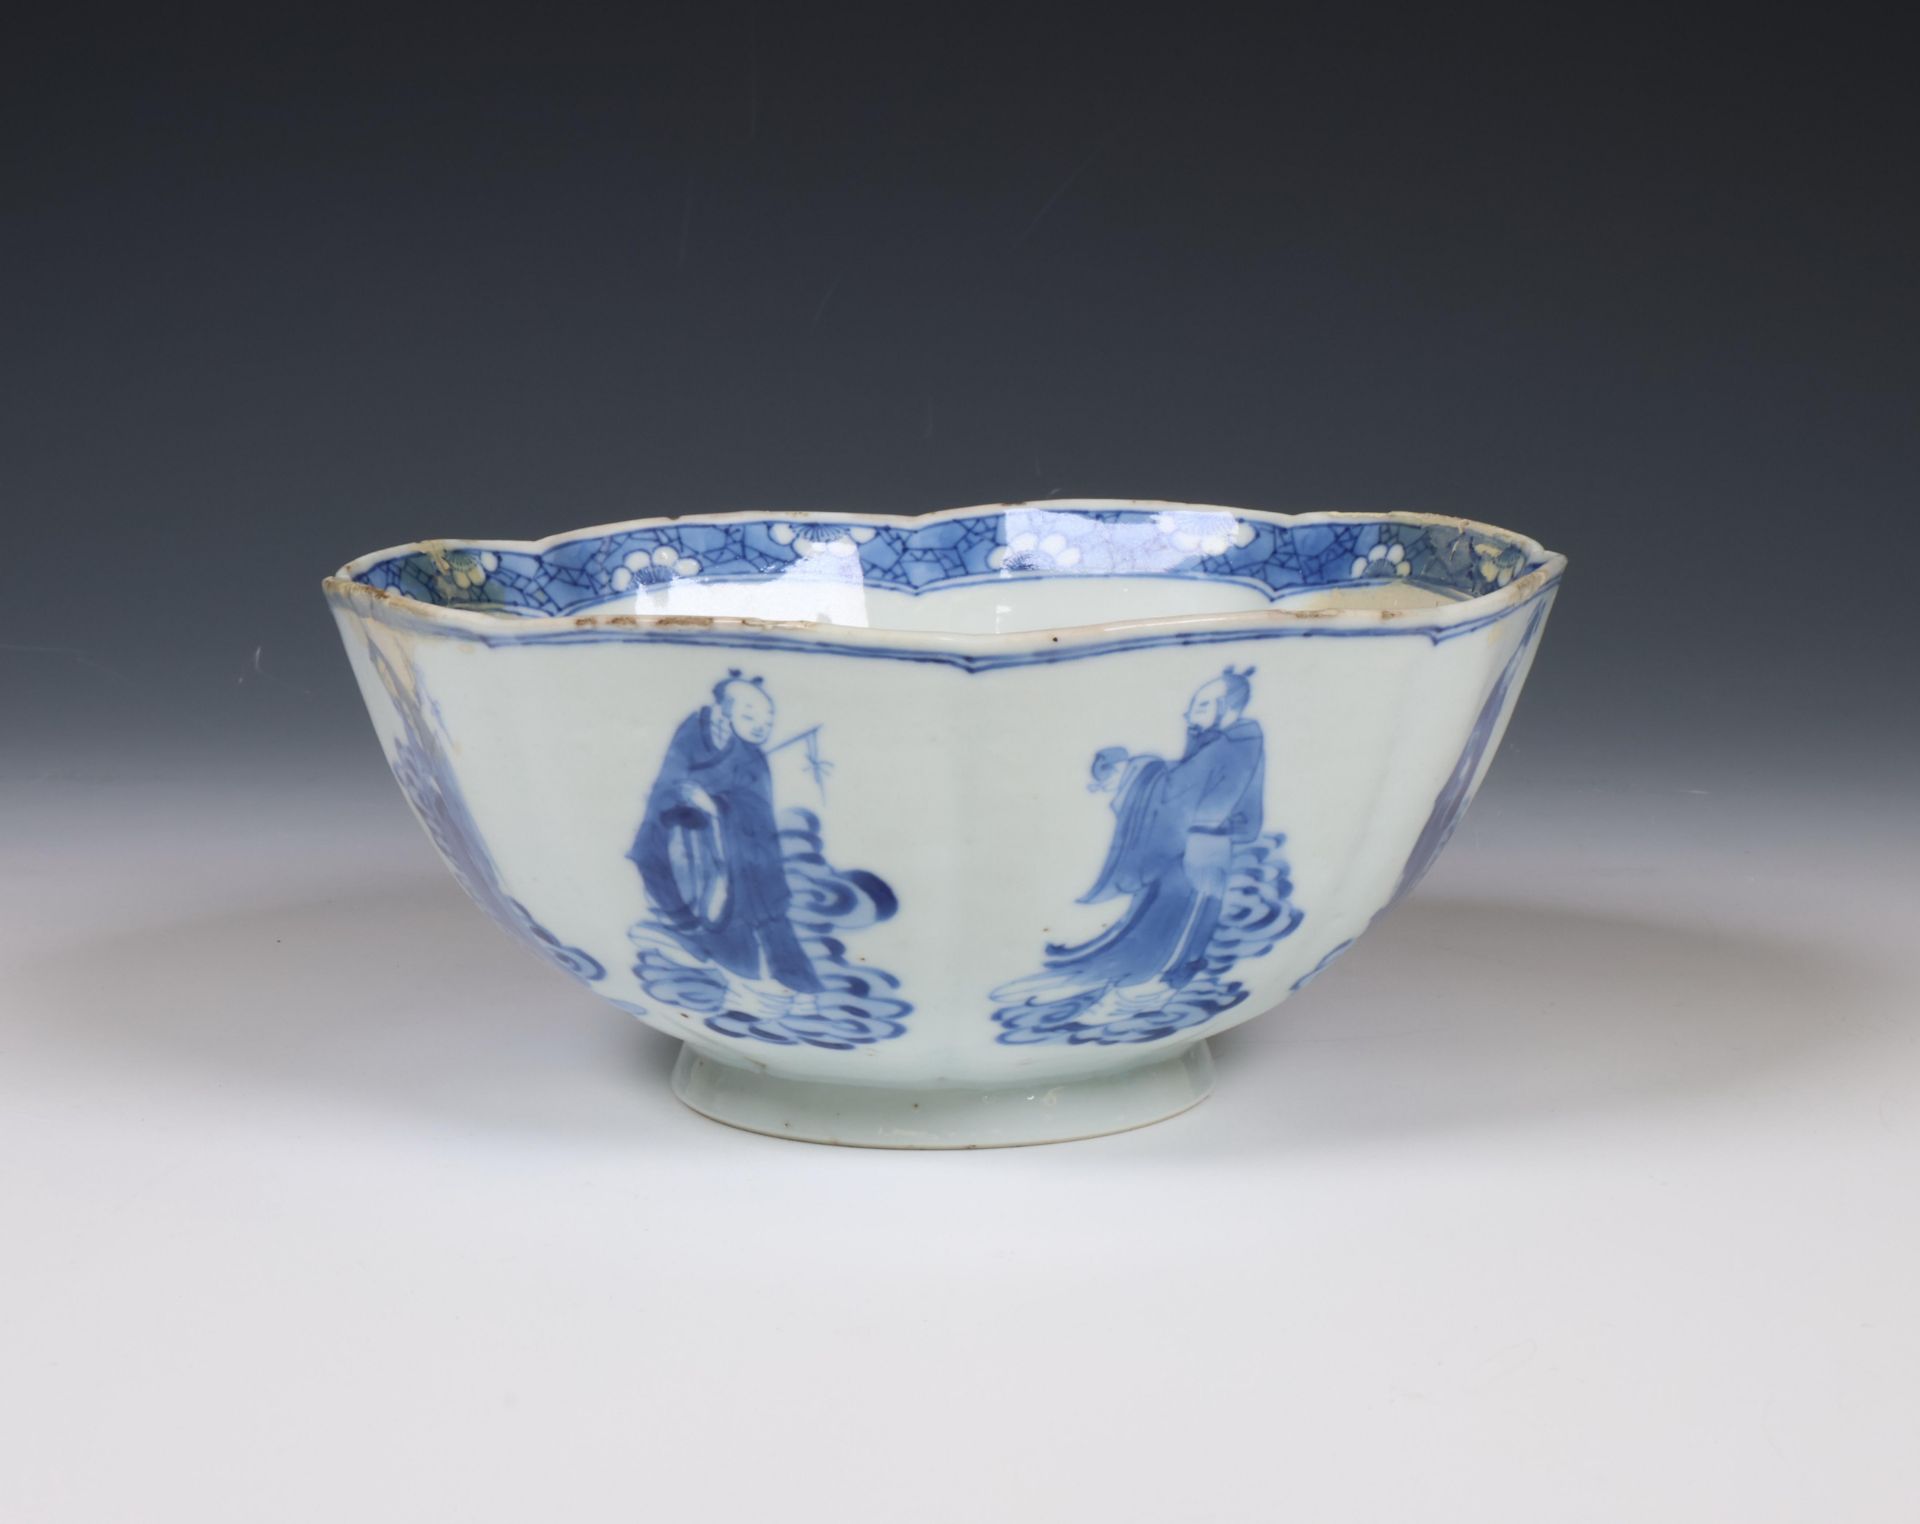 China, blue and white porcelain 'Immortals' bowl, Kangxi period (1662-1722), - Image 4 of 6